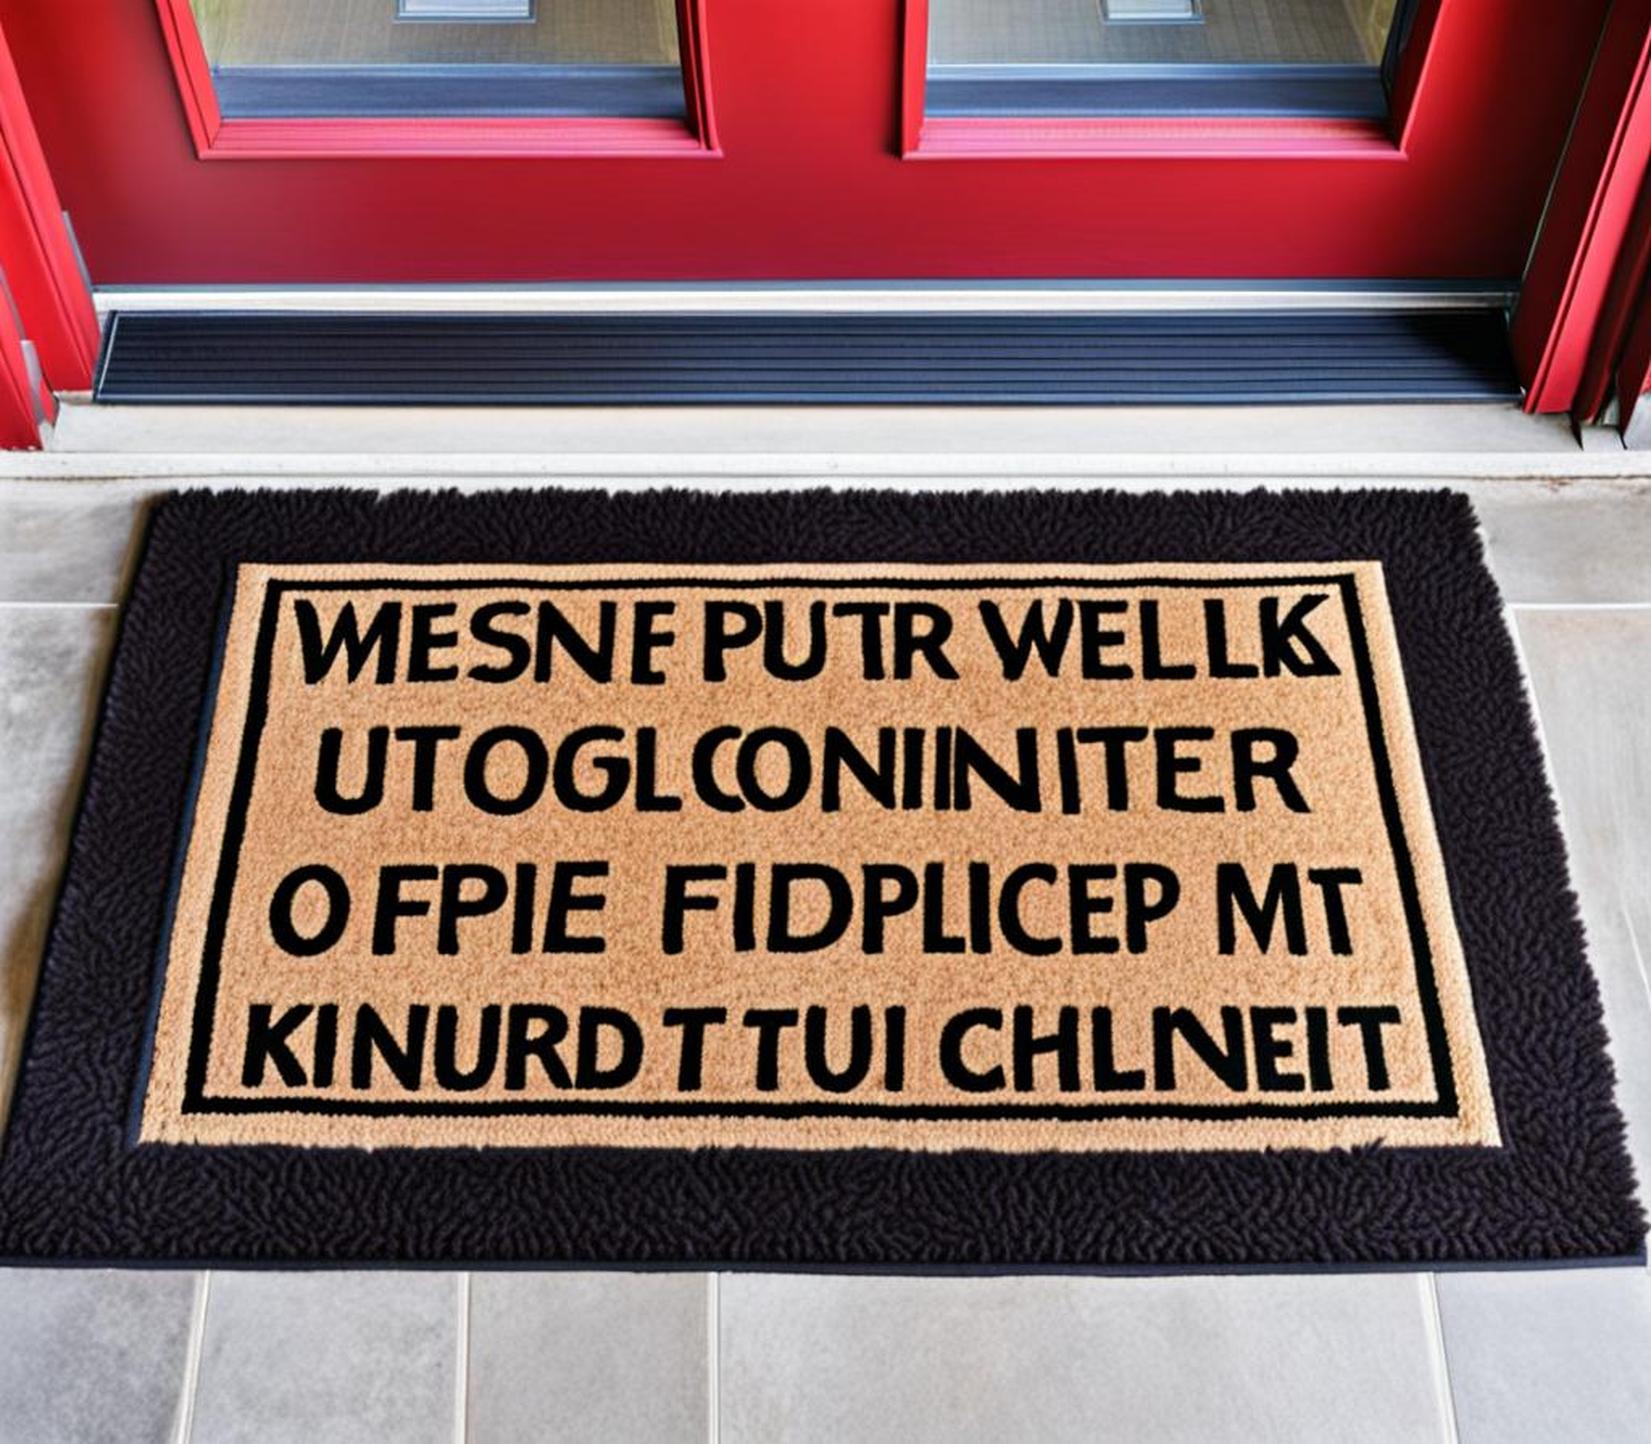 Door Mats with Funny Sayings Add Personality to Your Entryway